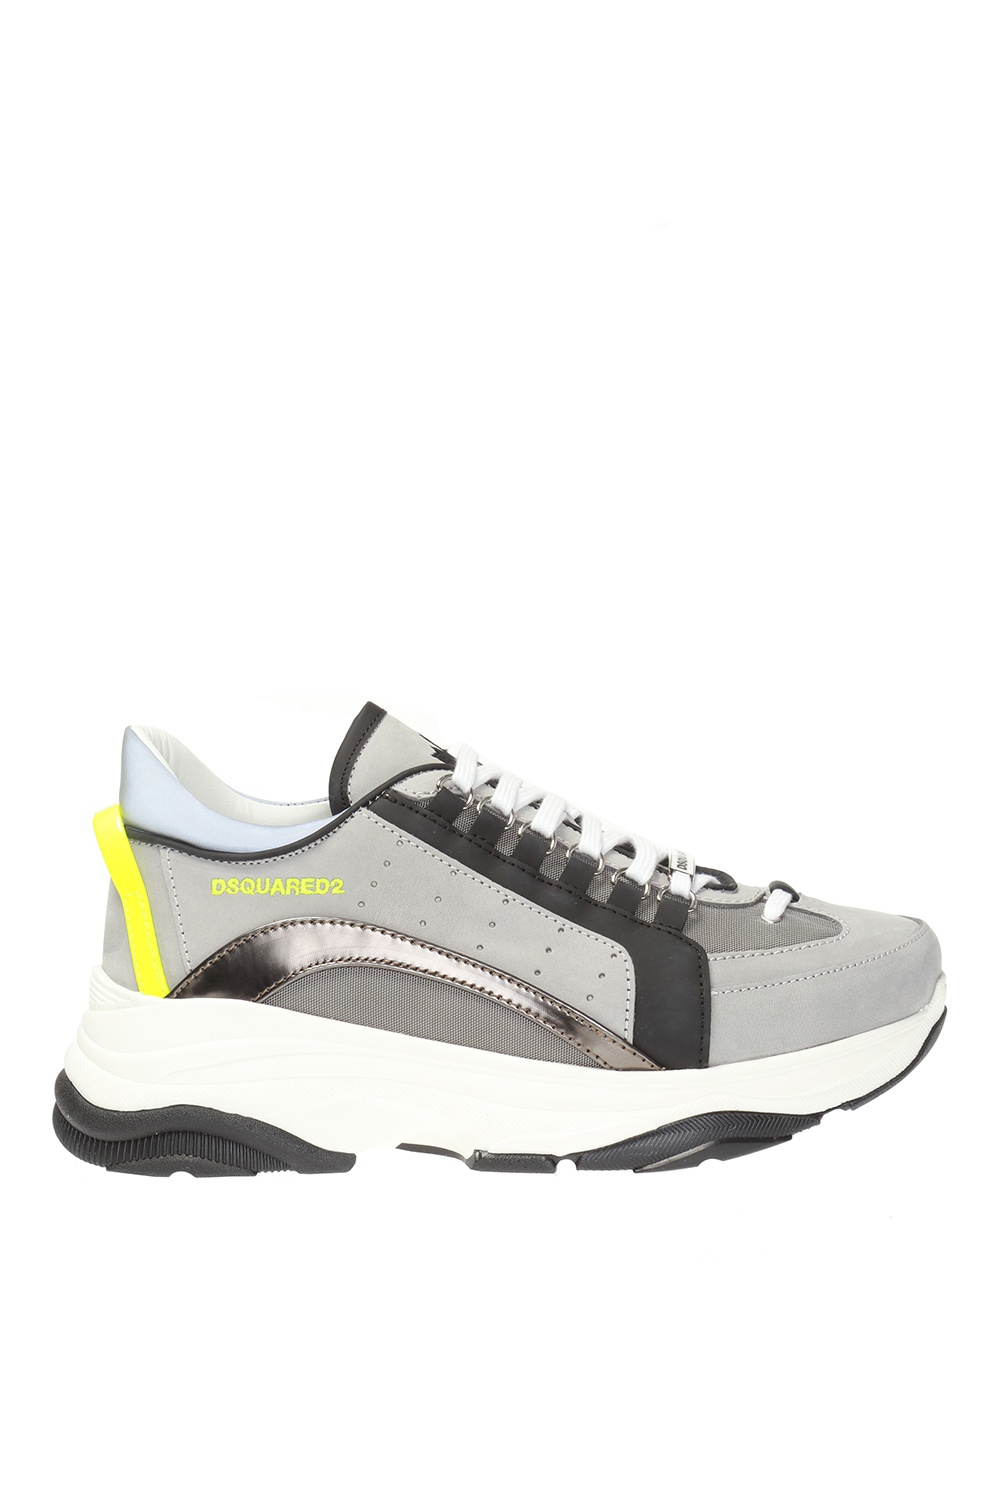 dsquared sneakers 551